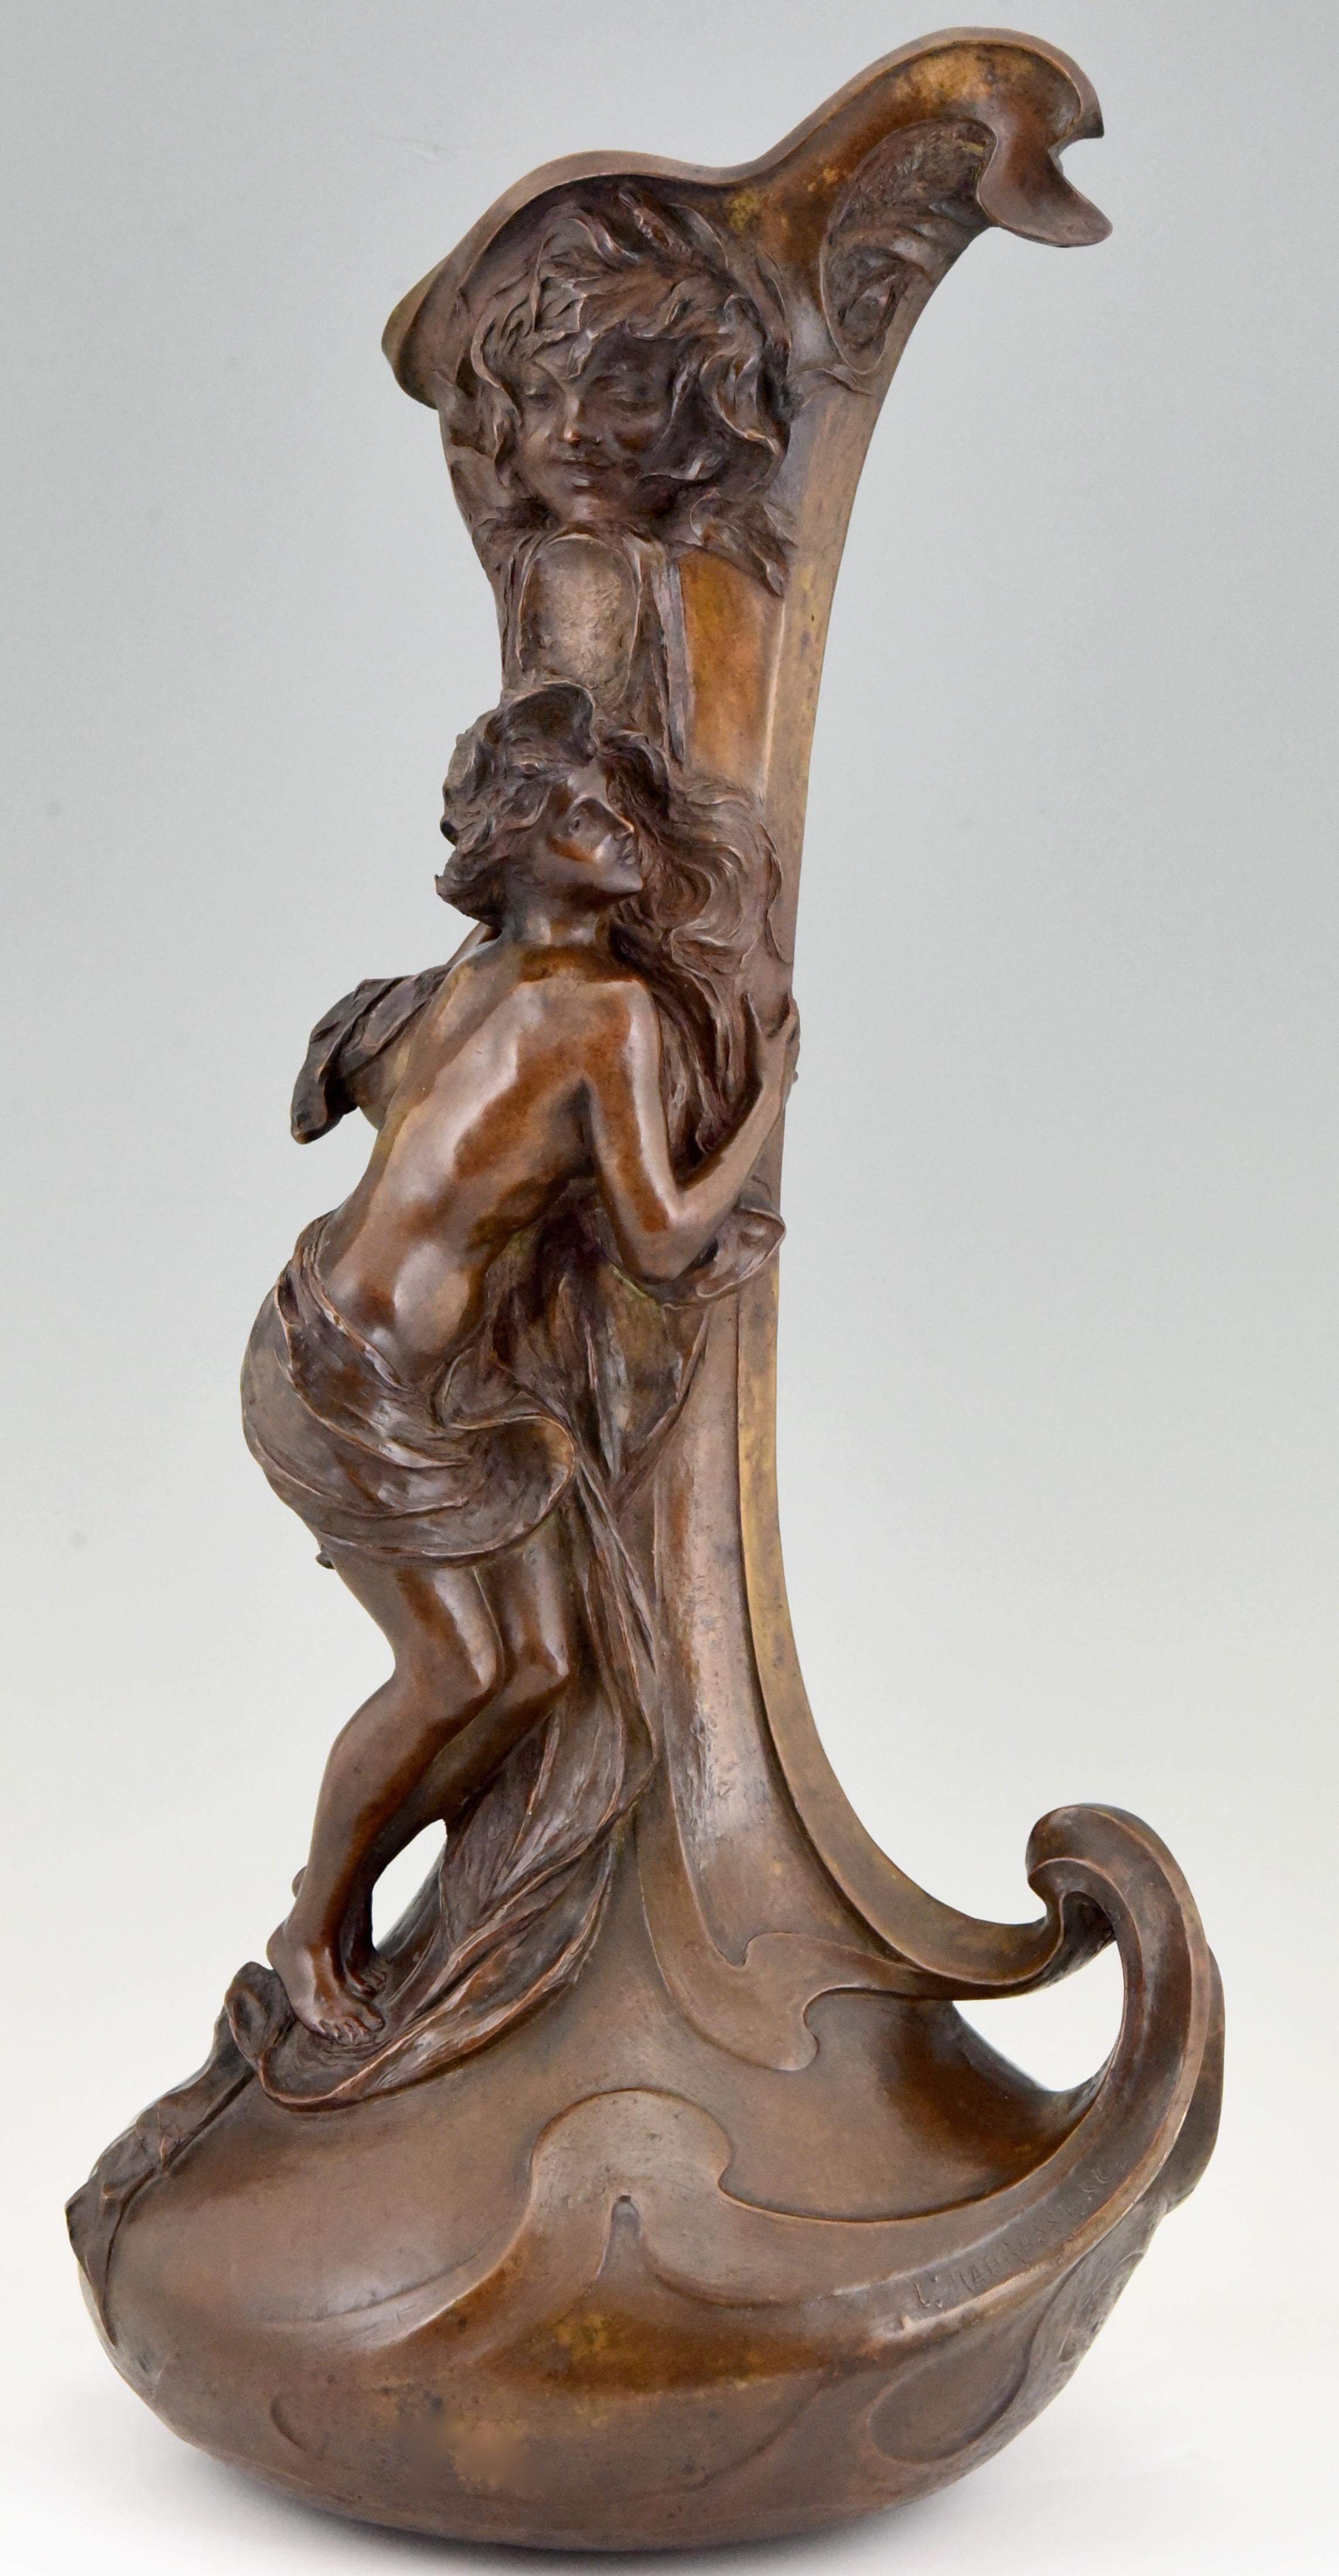 Important and rare bronze Art Nouveau vase picturing a semi nude lady at a fountain signed by Lucas Madrassi (1848-1919) marked cire perdue, cast in lost wax technique. Beautiful rich brown patina. 

Literature:
Etains 1900” Philippe Dahan, les